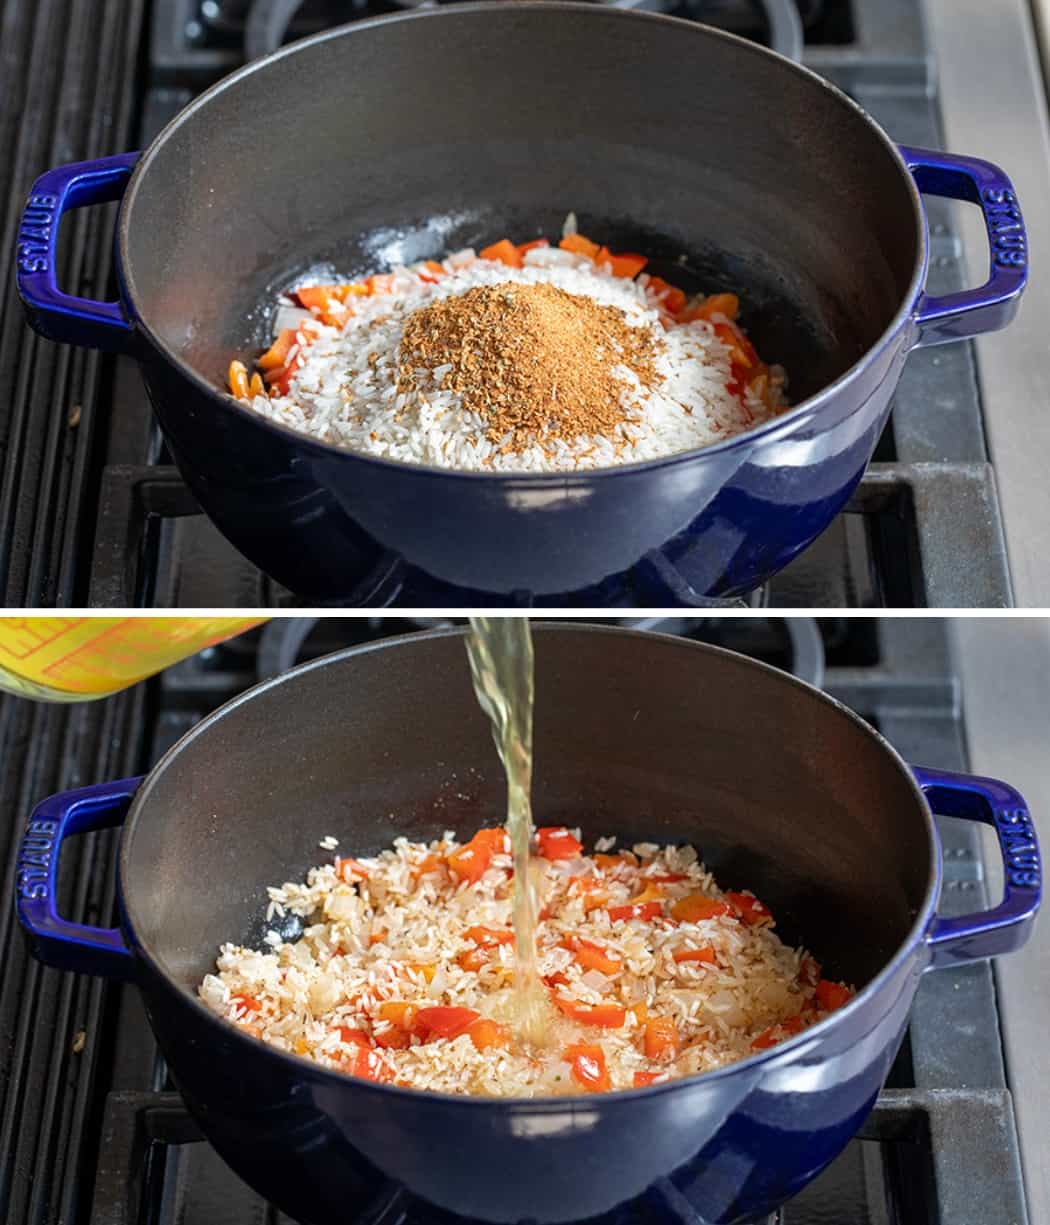 Ingredients for Preparing Cajun Shrimp and Rice on a Stovetop in a Blue Pan.